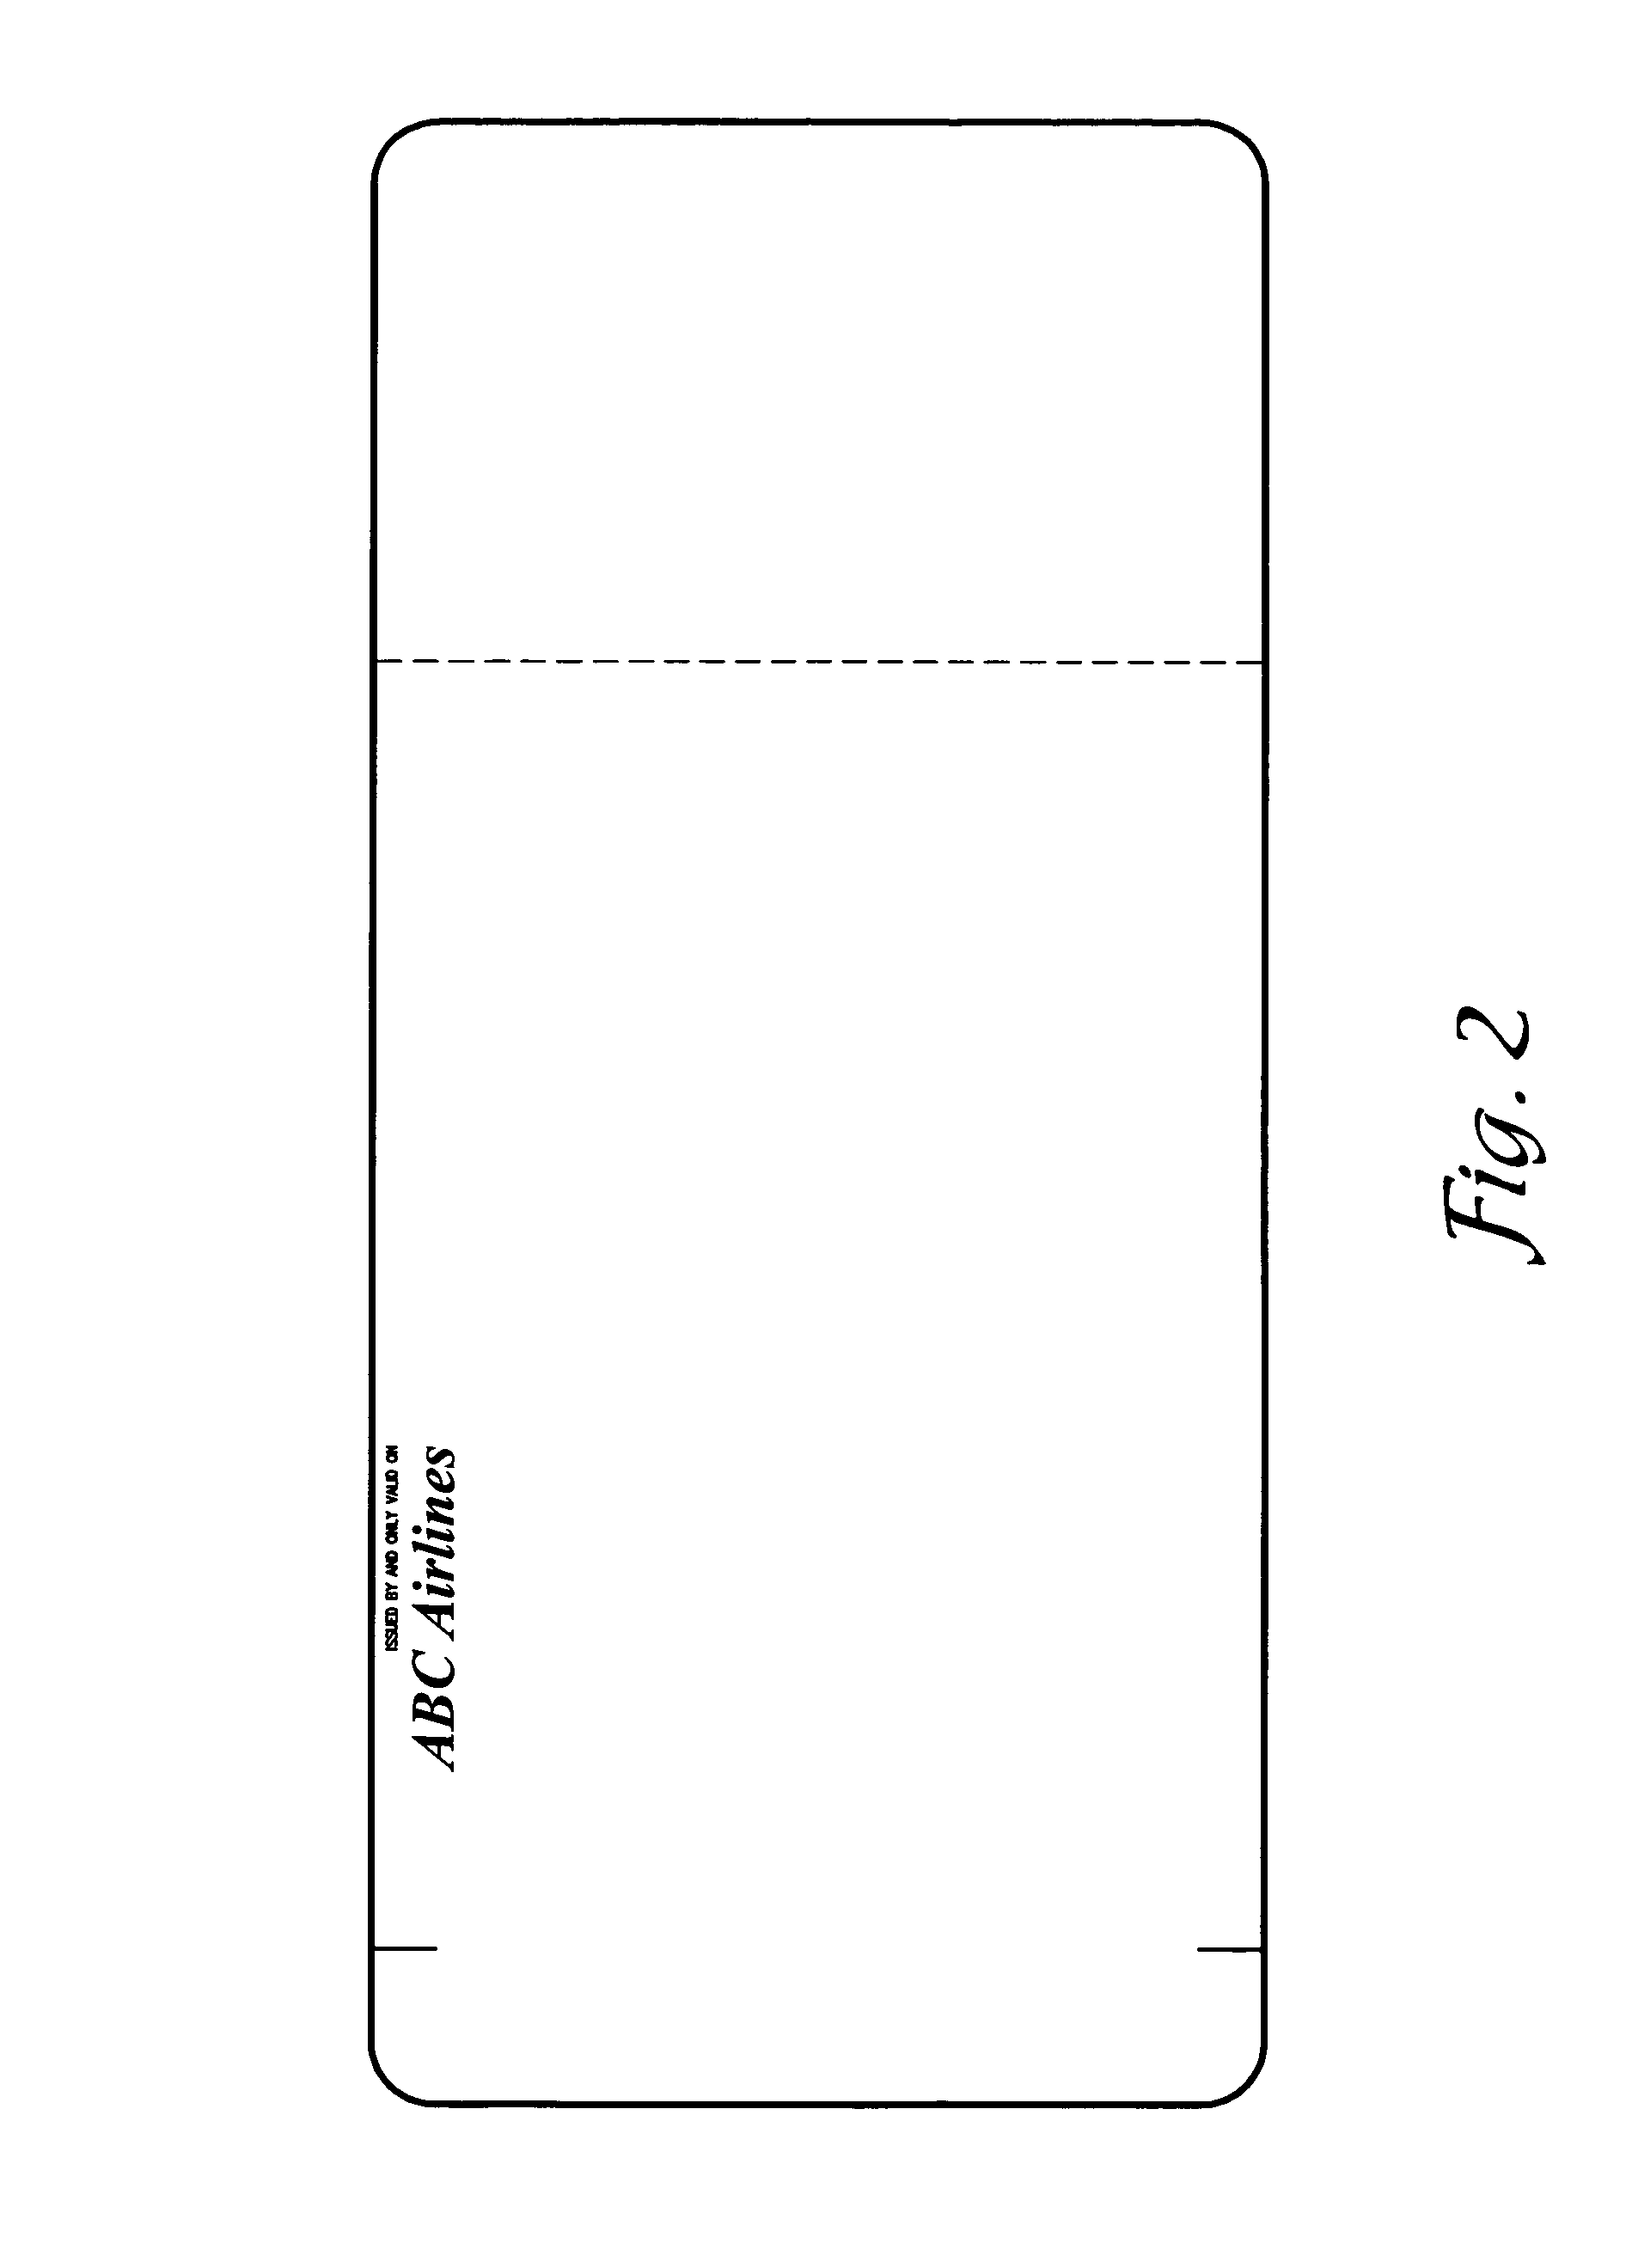 Method of selecting and storing airline ticket data